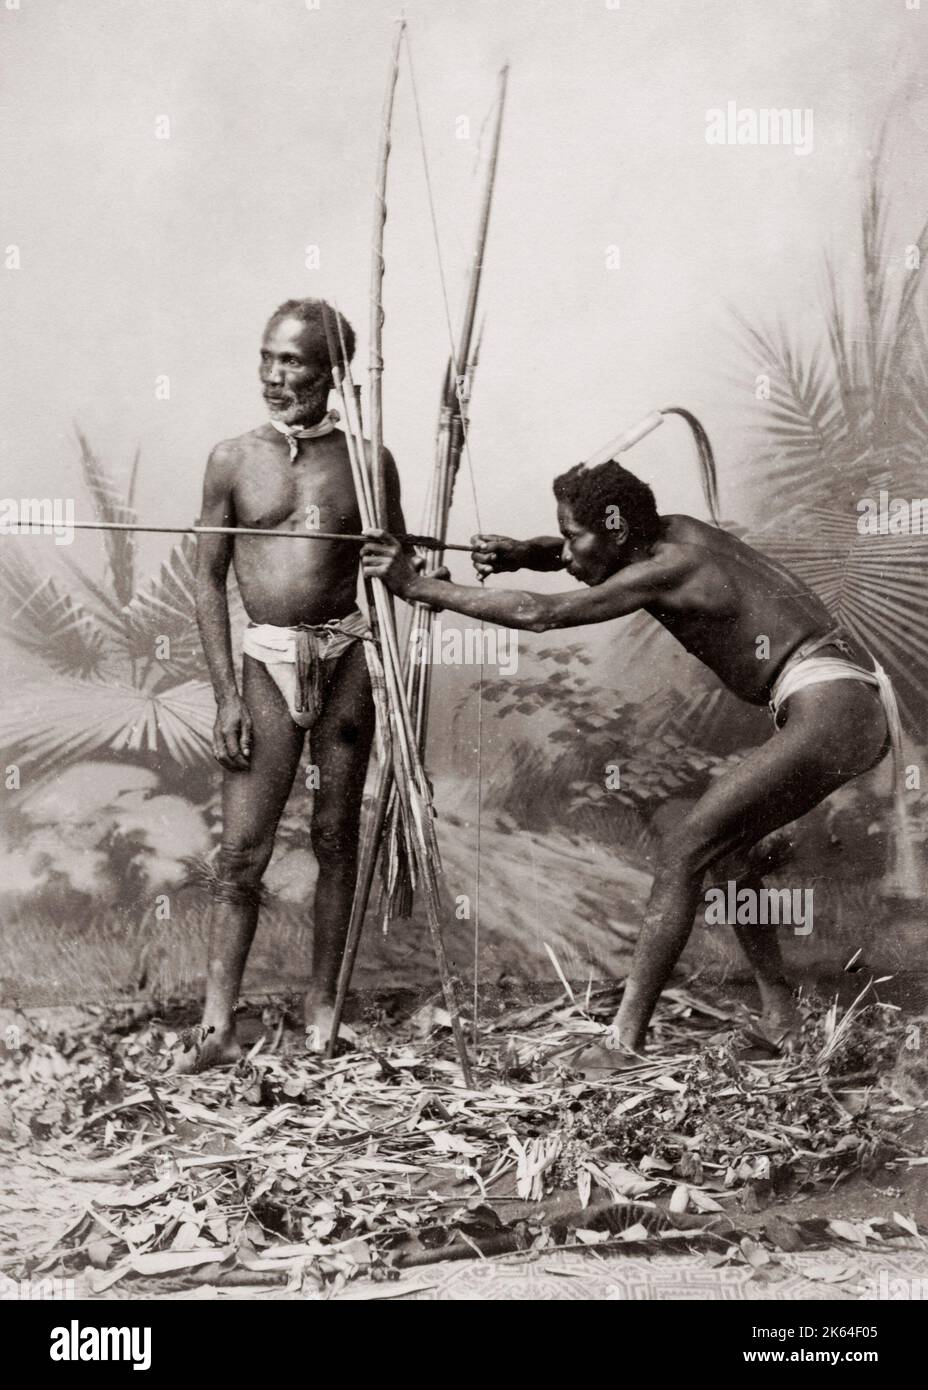 Hunters with bows and arrows, Philippines, c. 1890 Stock Photo